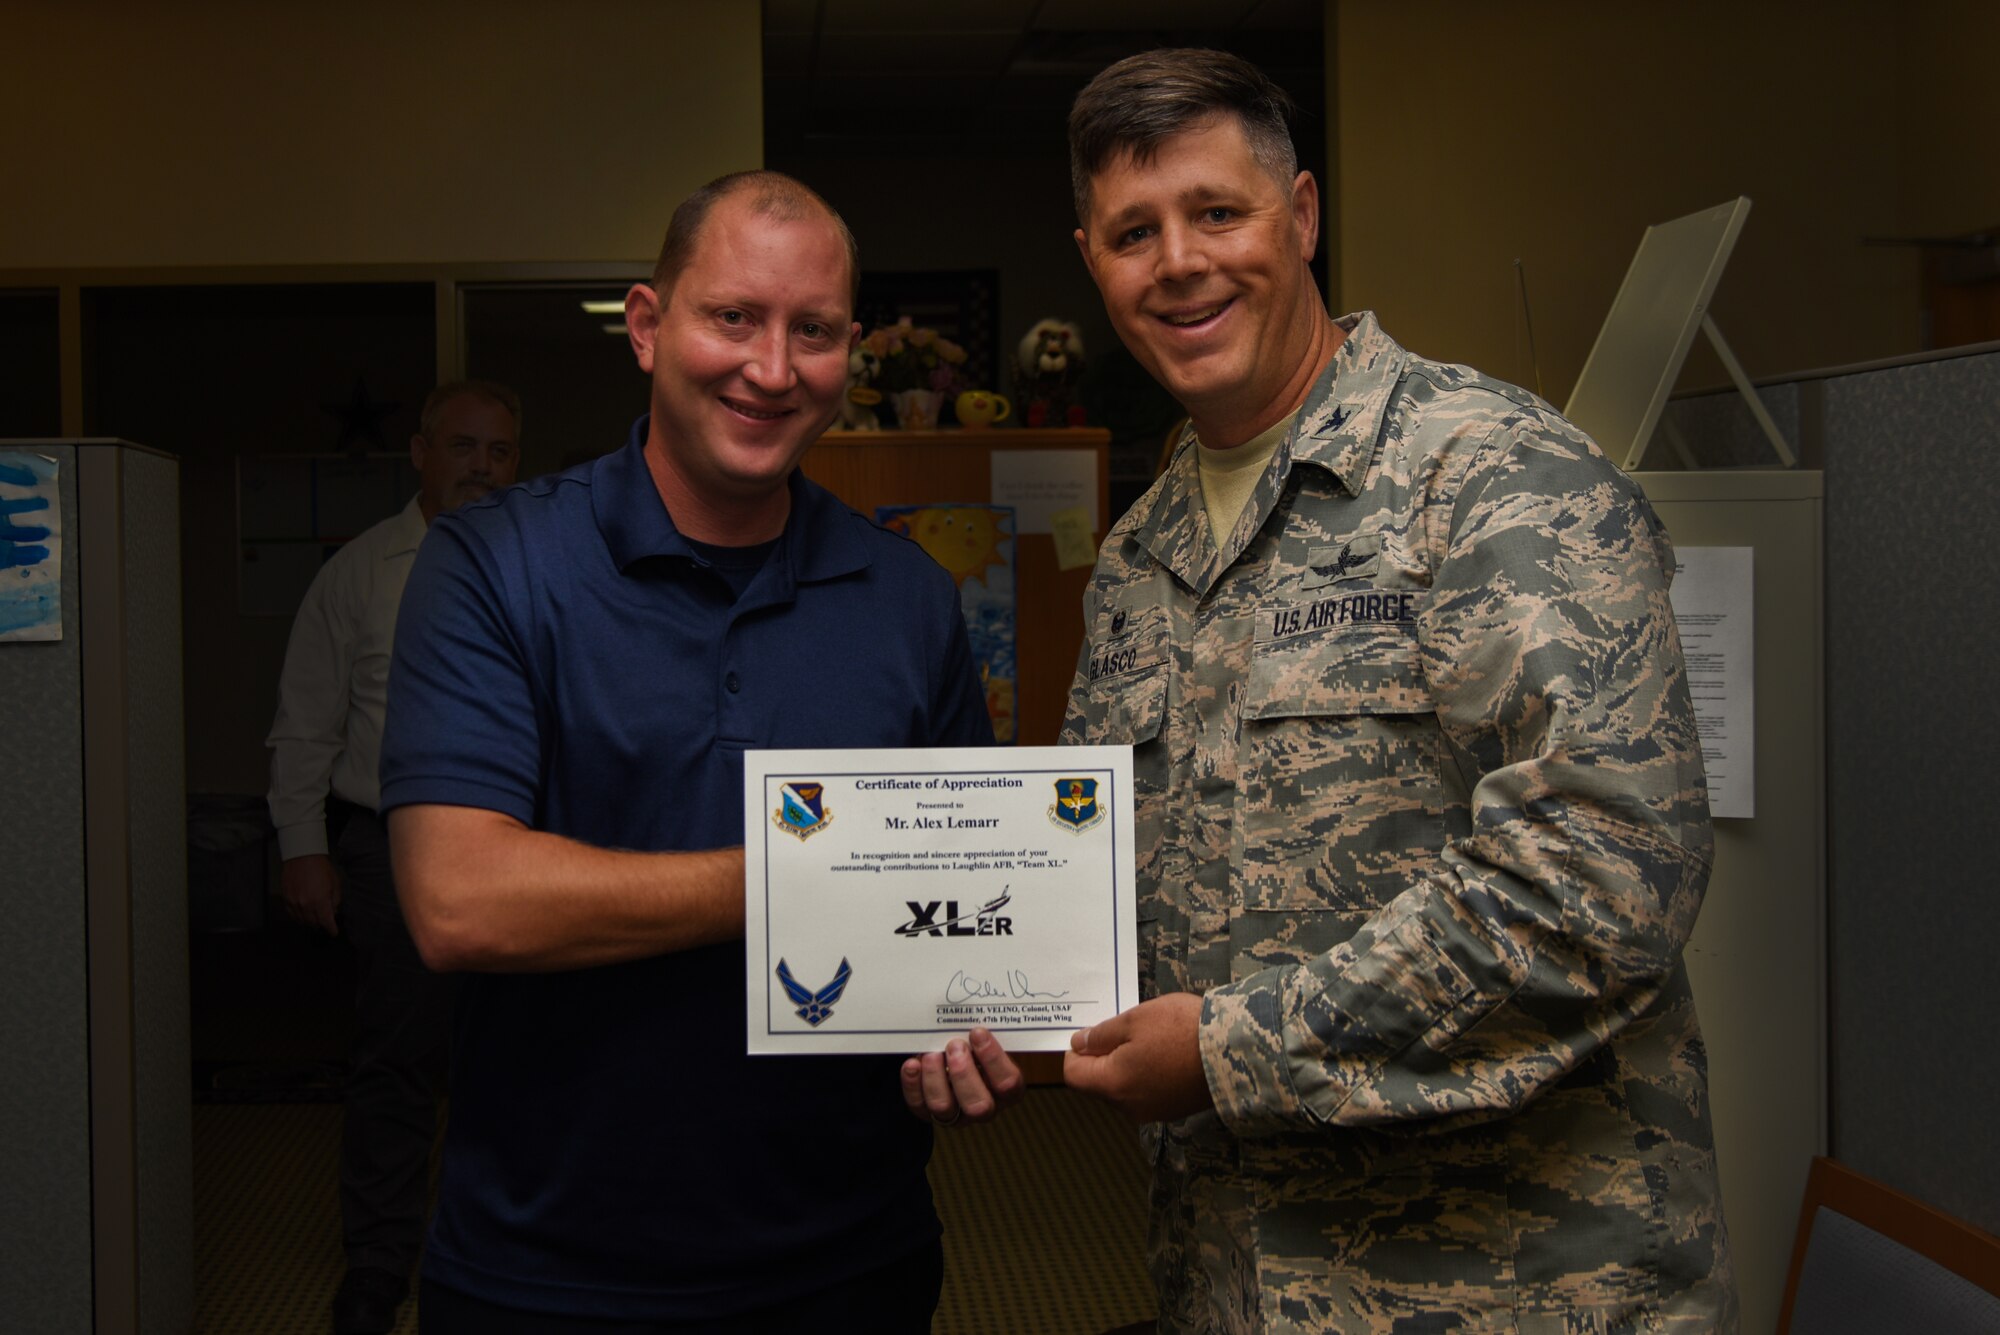 Alex Lemarr, 47th Maintenance Directorate T-6 aircraft scheduler, was chosen by wing leadership to be the “XLer” of the week, for the week of July 16, 2018, at Laughlin Air Force Base, Texas. The “XLer” award, presented by Col. Ted Glasco, 47th Mission Support Group commander, is given to those who consistently make outstanding contributions to their unit and the Laughlin mission. (U.S. Air Force photo by Airman 1st Class Marco A. Gomez)